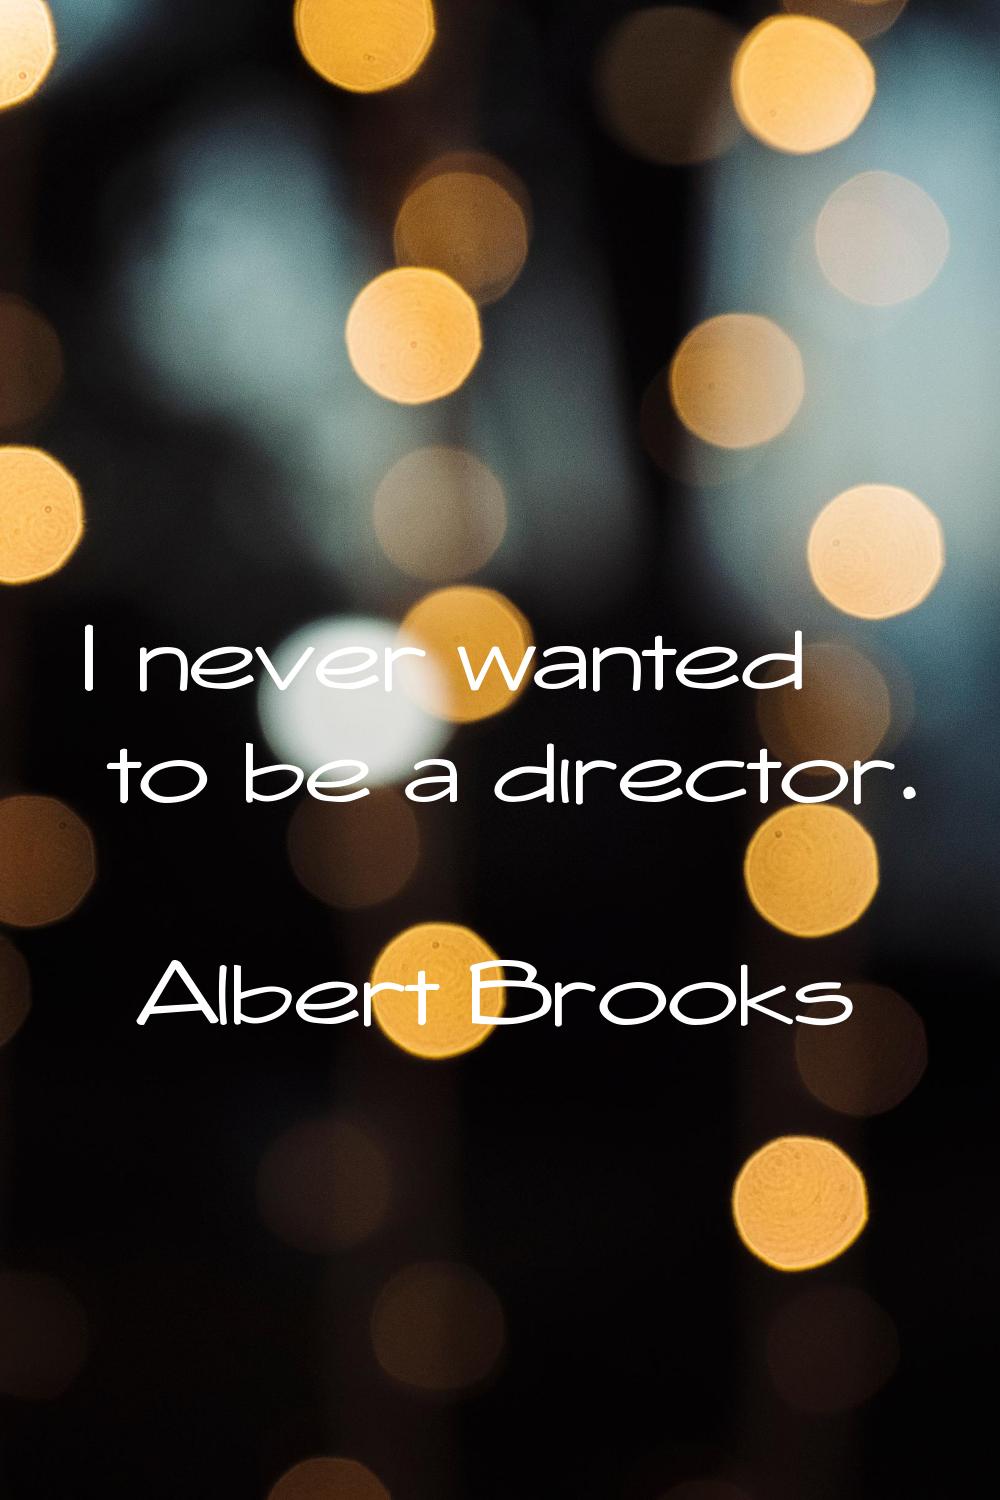 I never wanted to be a director.